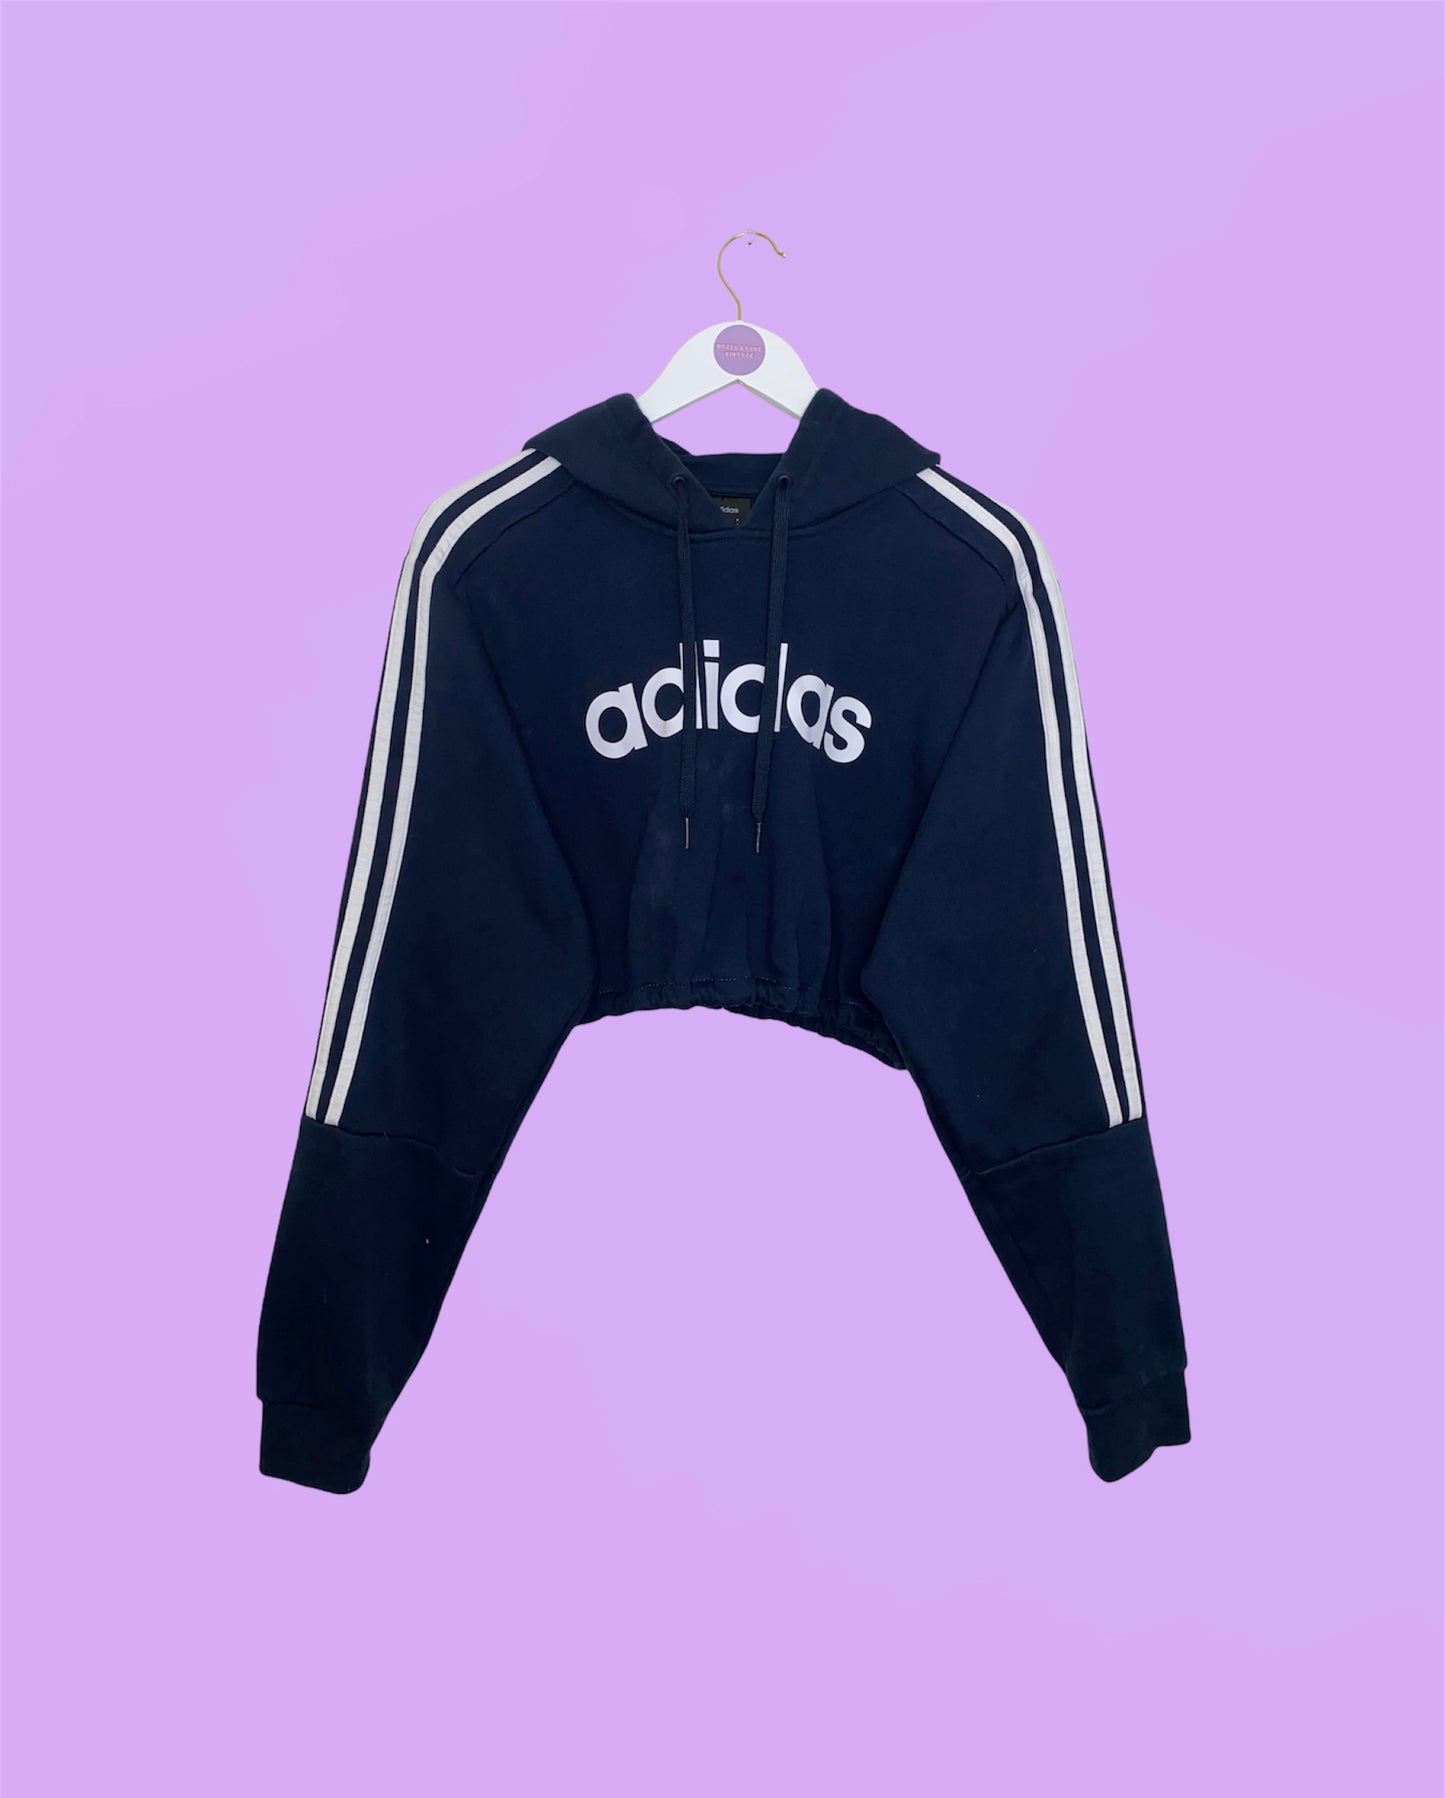 navy adidas cropped hoodie with white text adidas logo and stripes on sleeves shown on a white clothes hanger on a lilac background